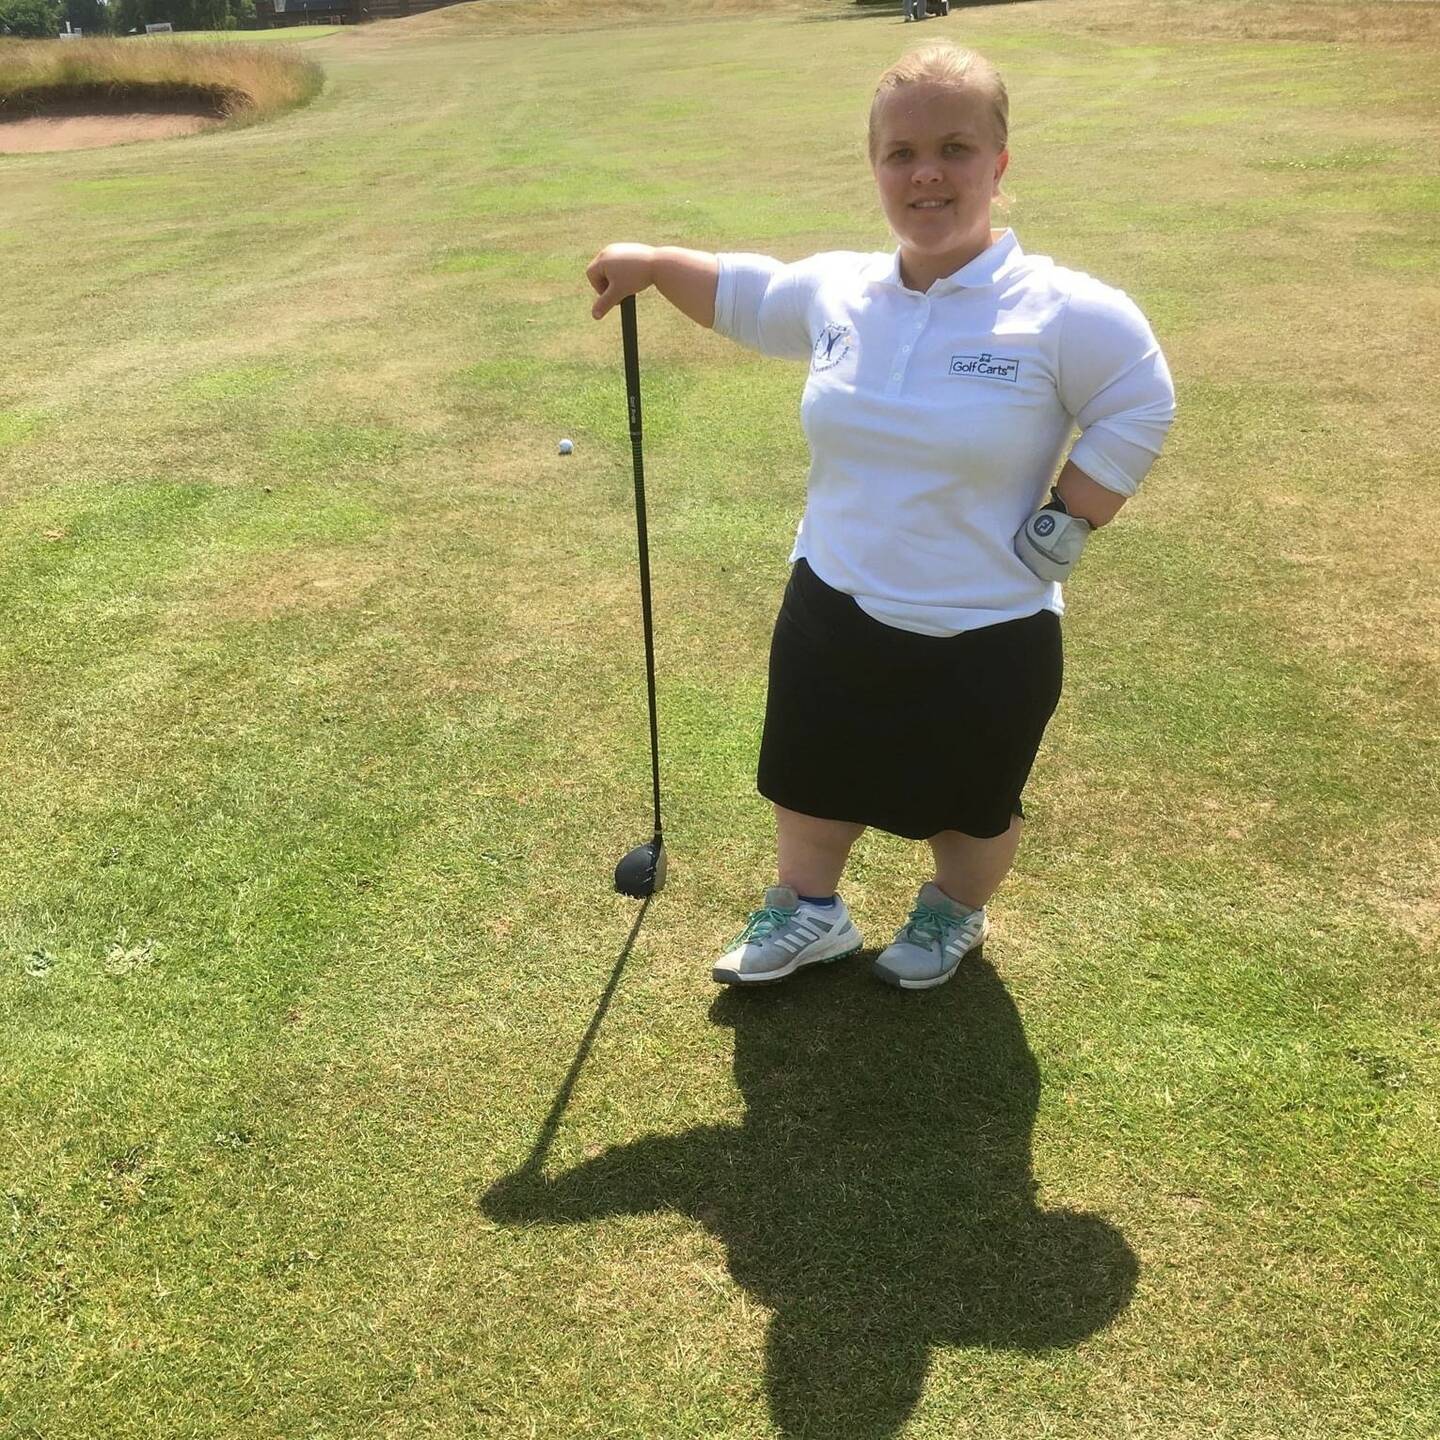 Ellie on golf course with club in hand smiling to camera